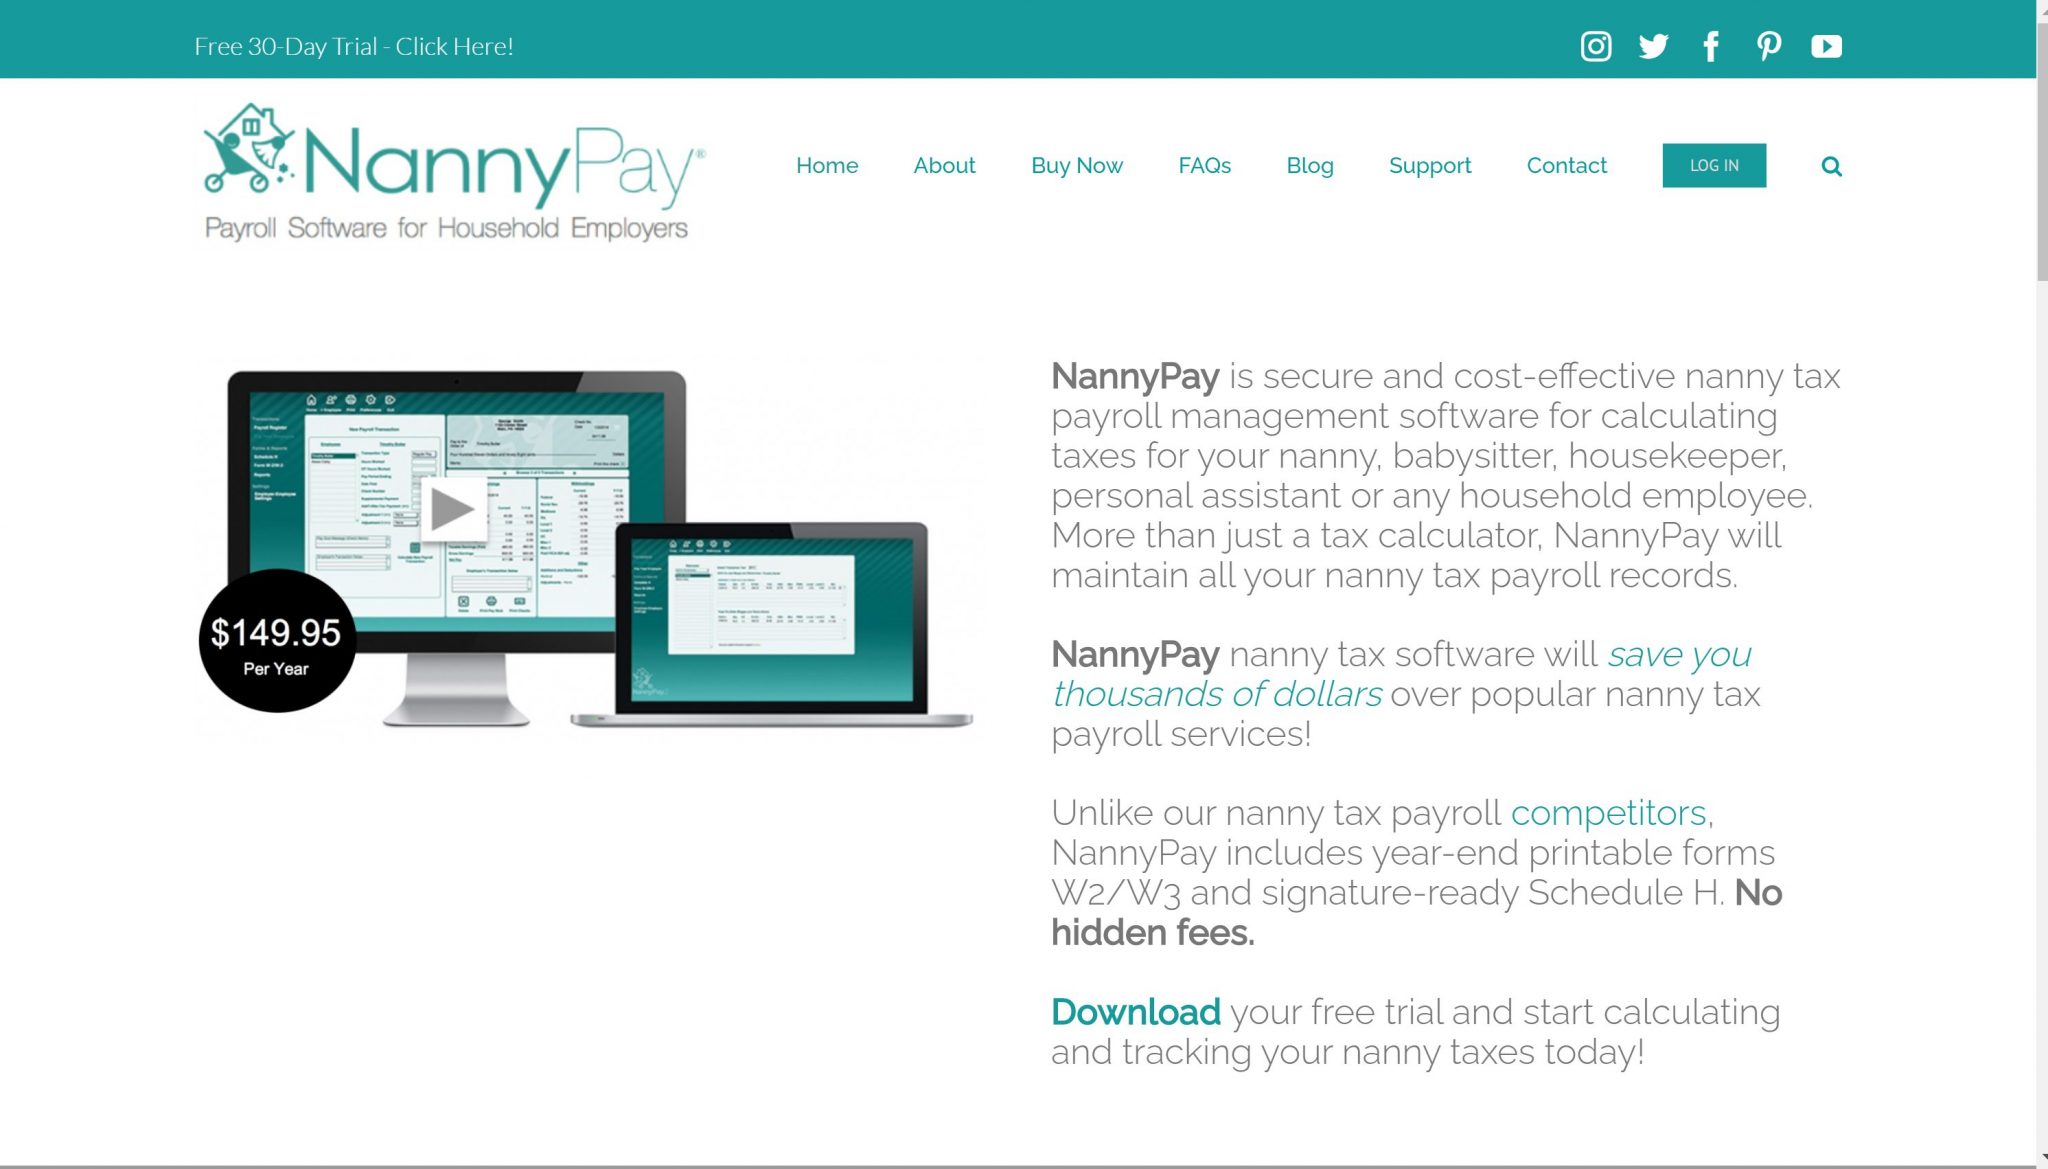 nannypay special coupons new users